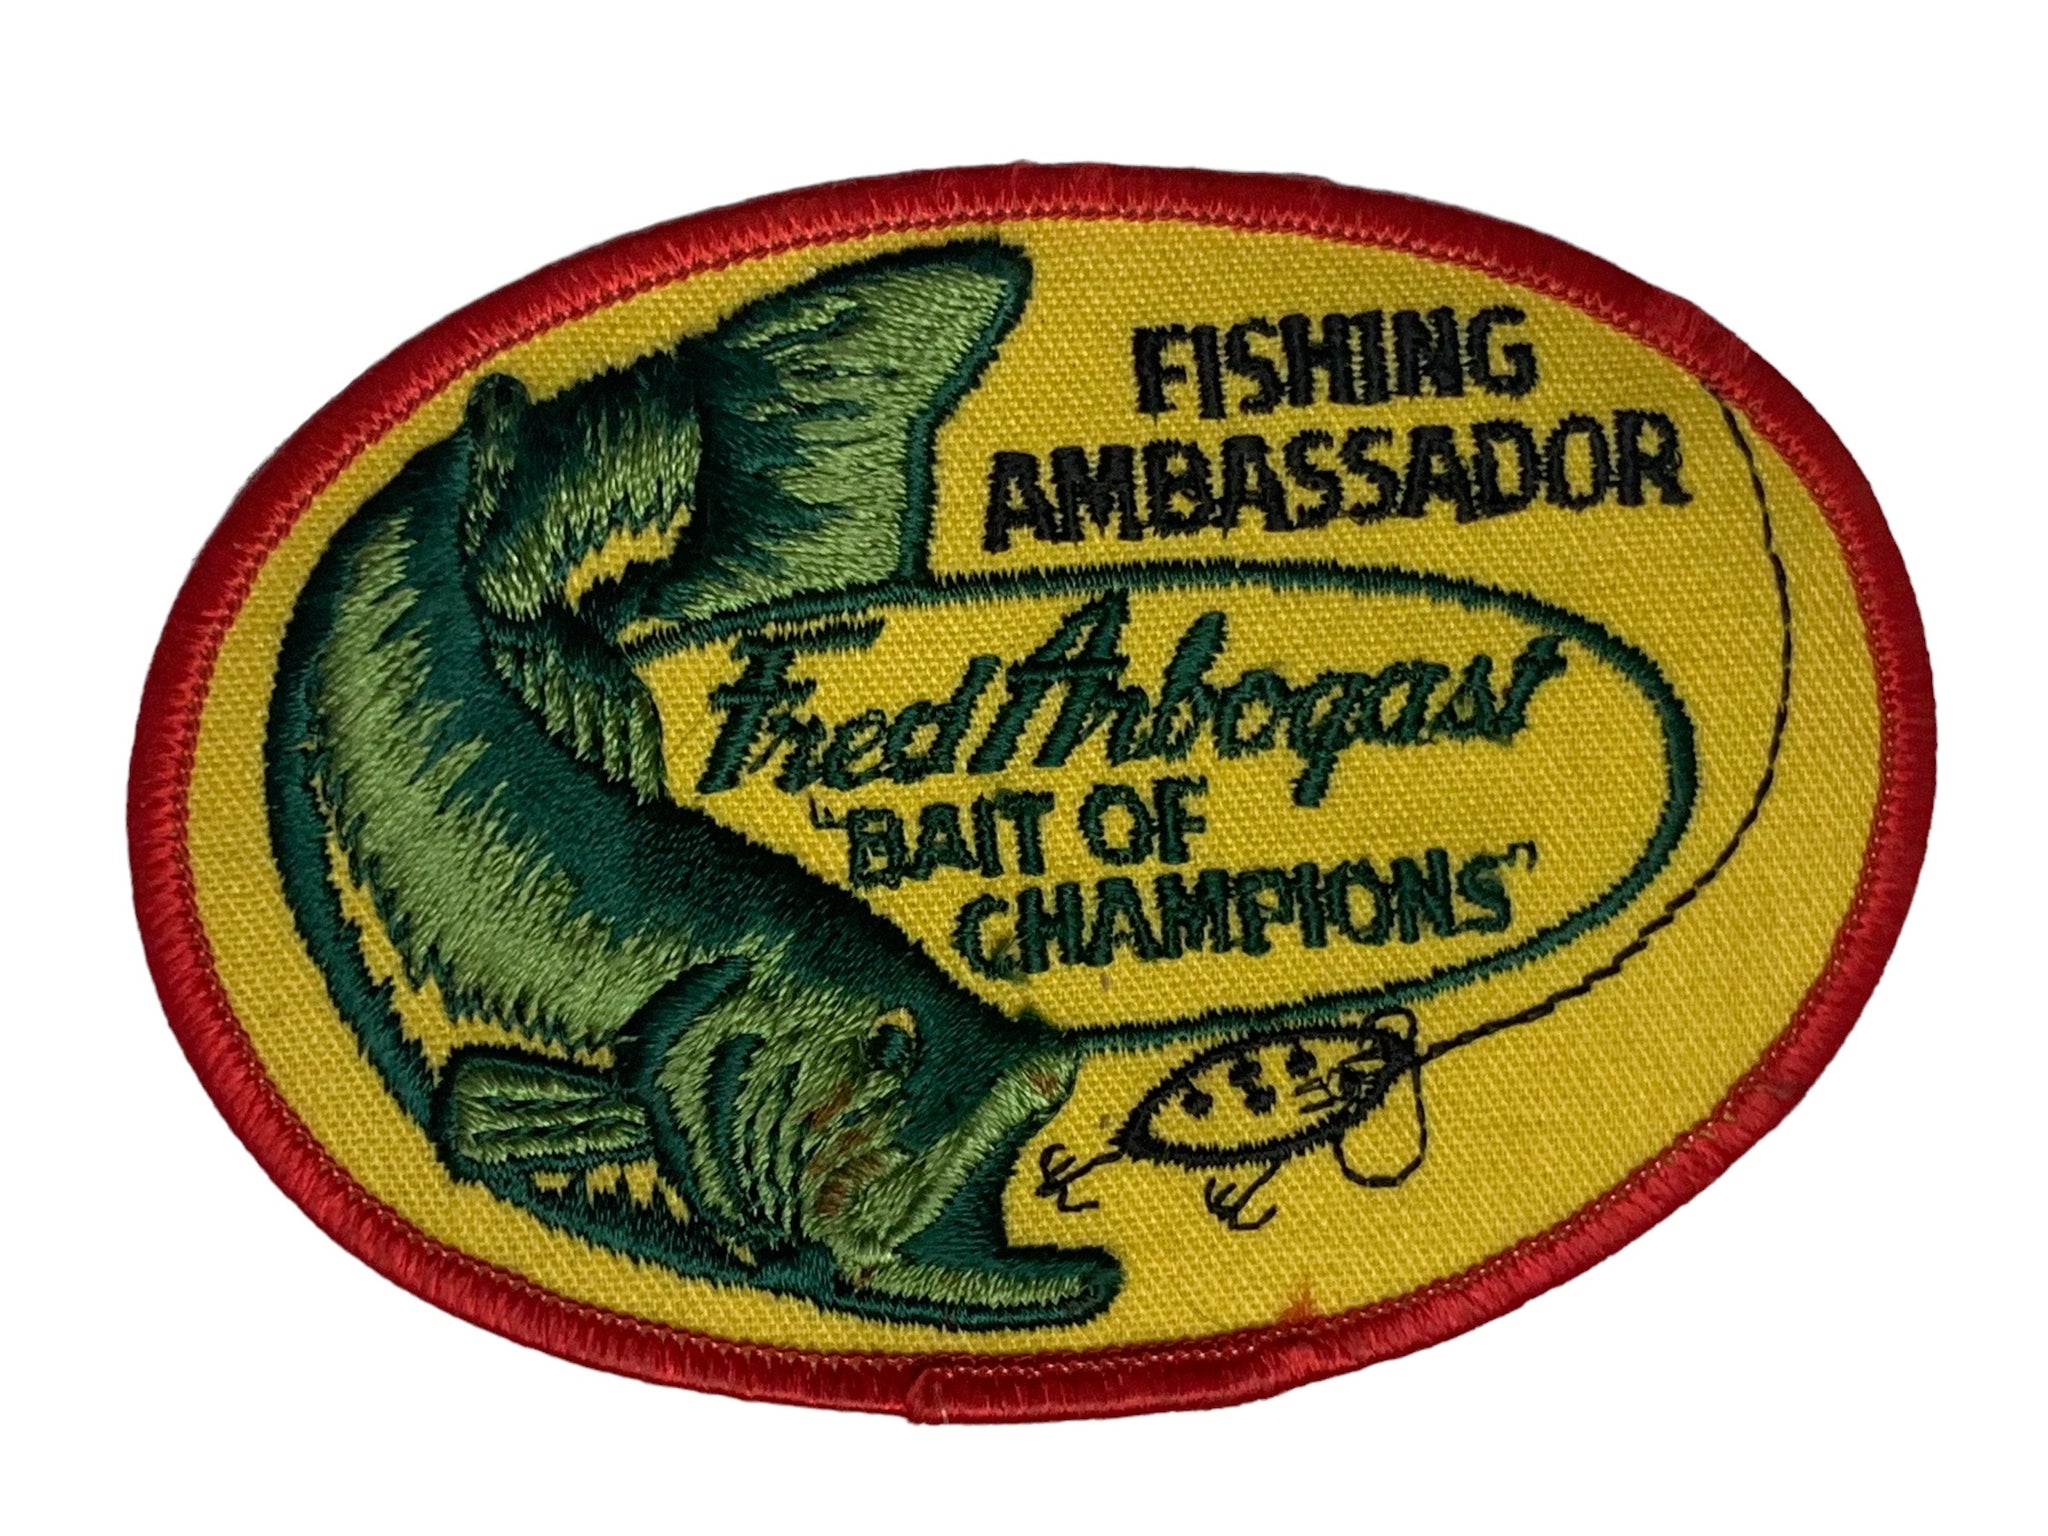 FRED ARBOGAST BASS FISHING AMBASSADOR Vintage Patch in Red – Toad Tackle